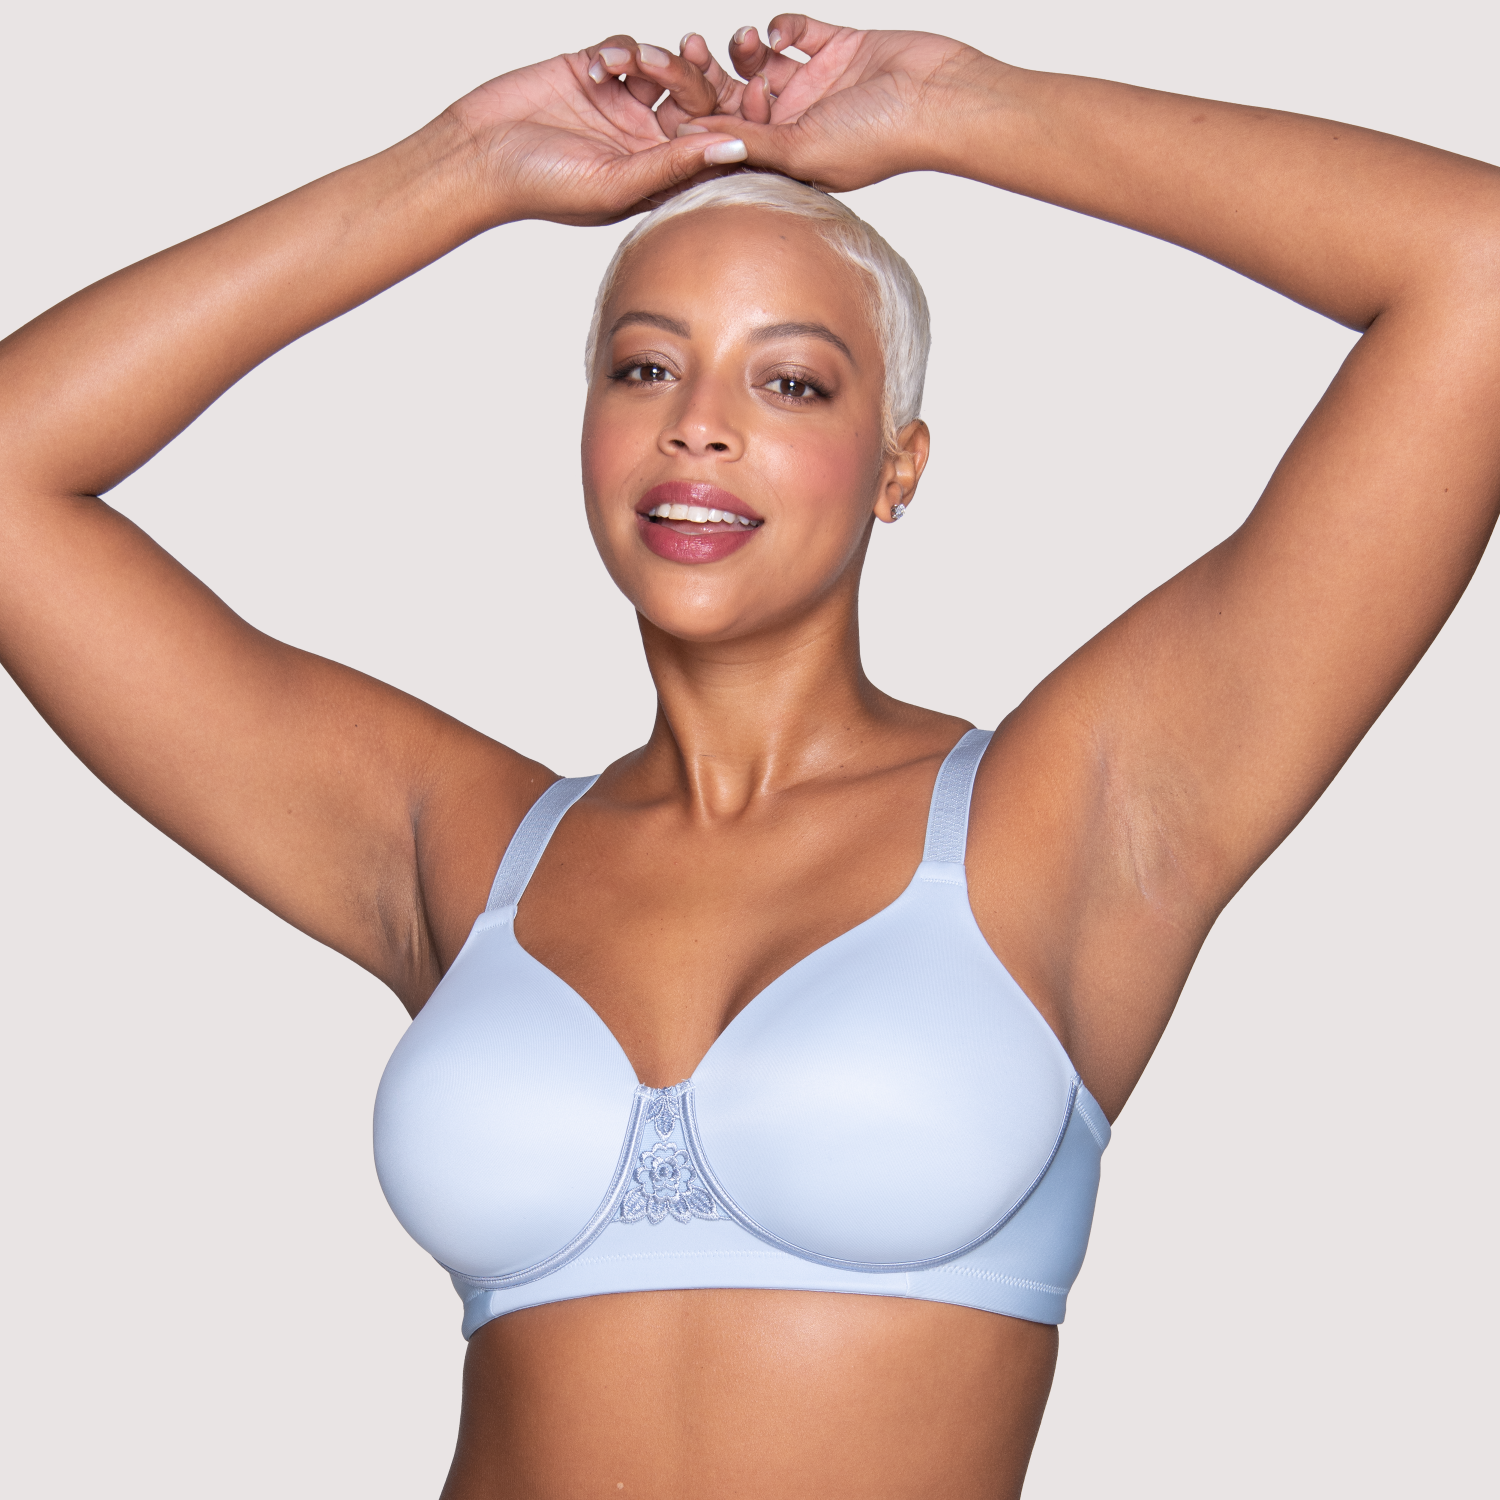 Buy Bali Women's Double Support Cotton Stretch Wire-Free Bra